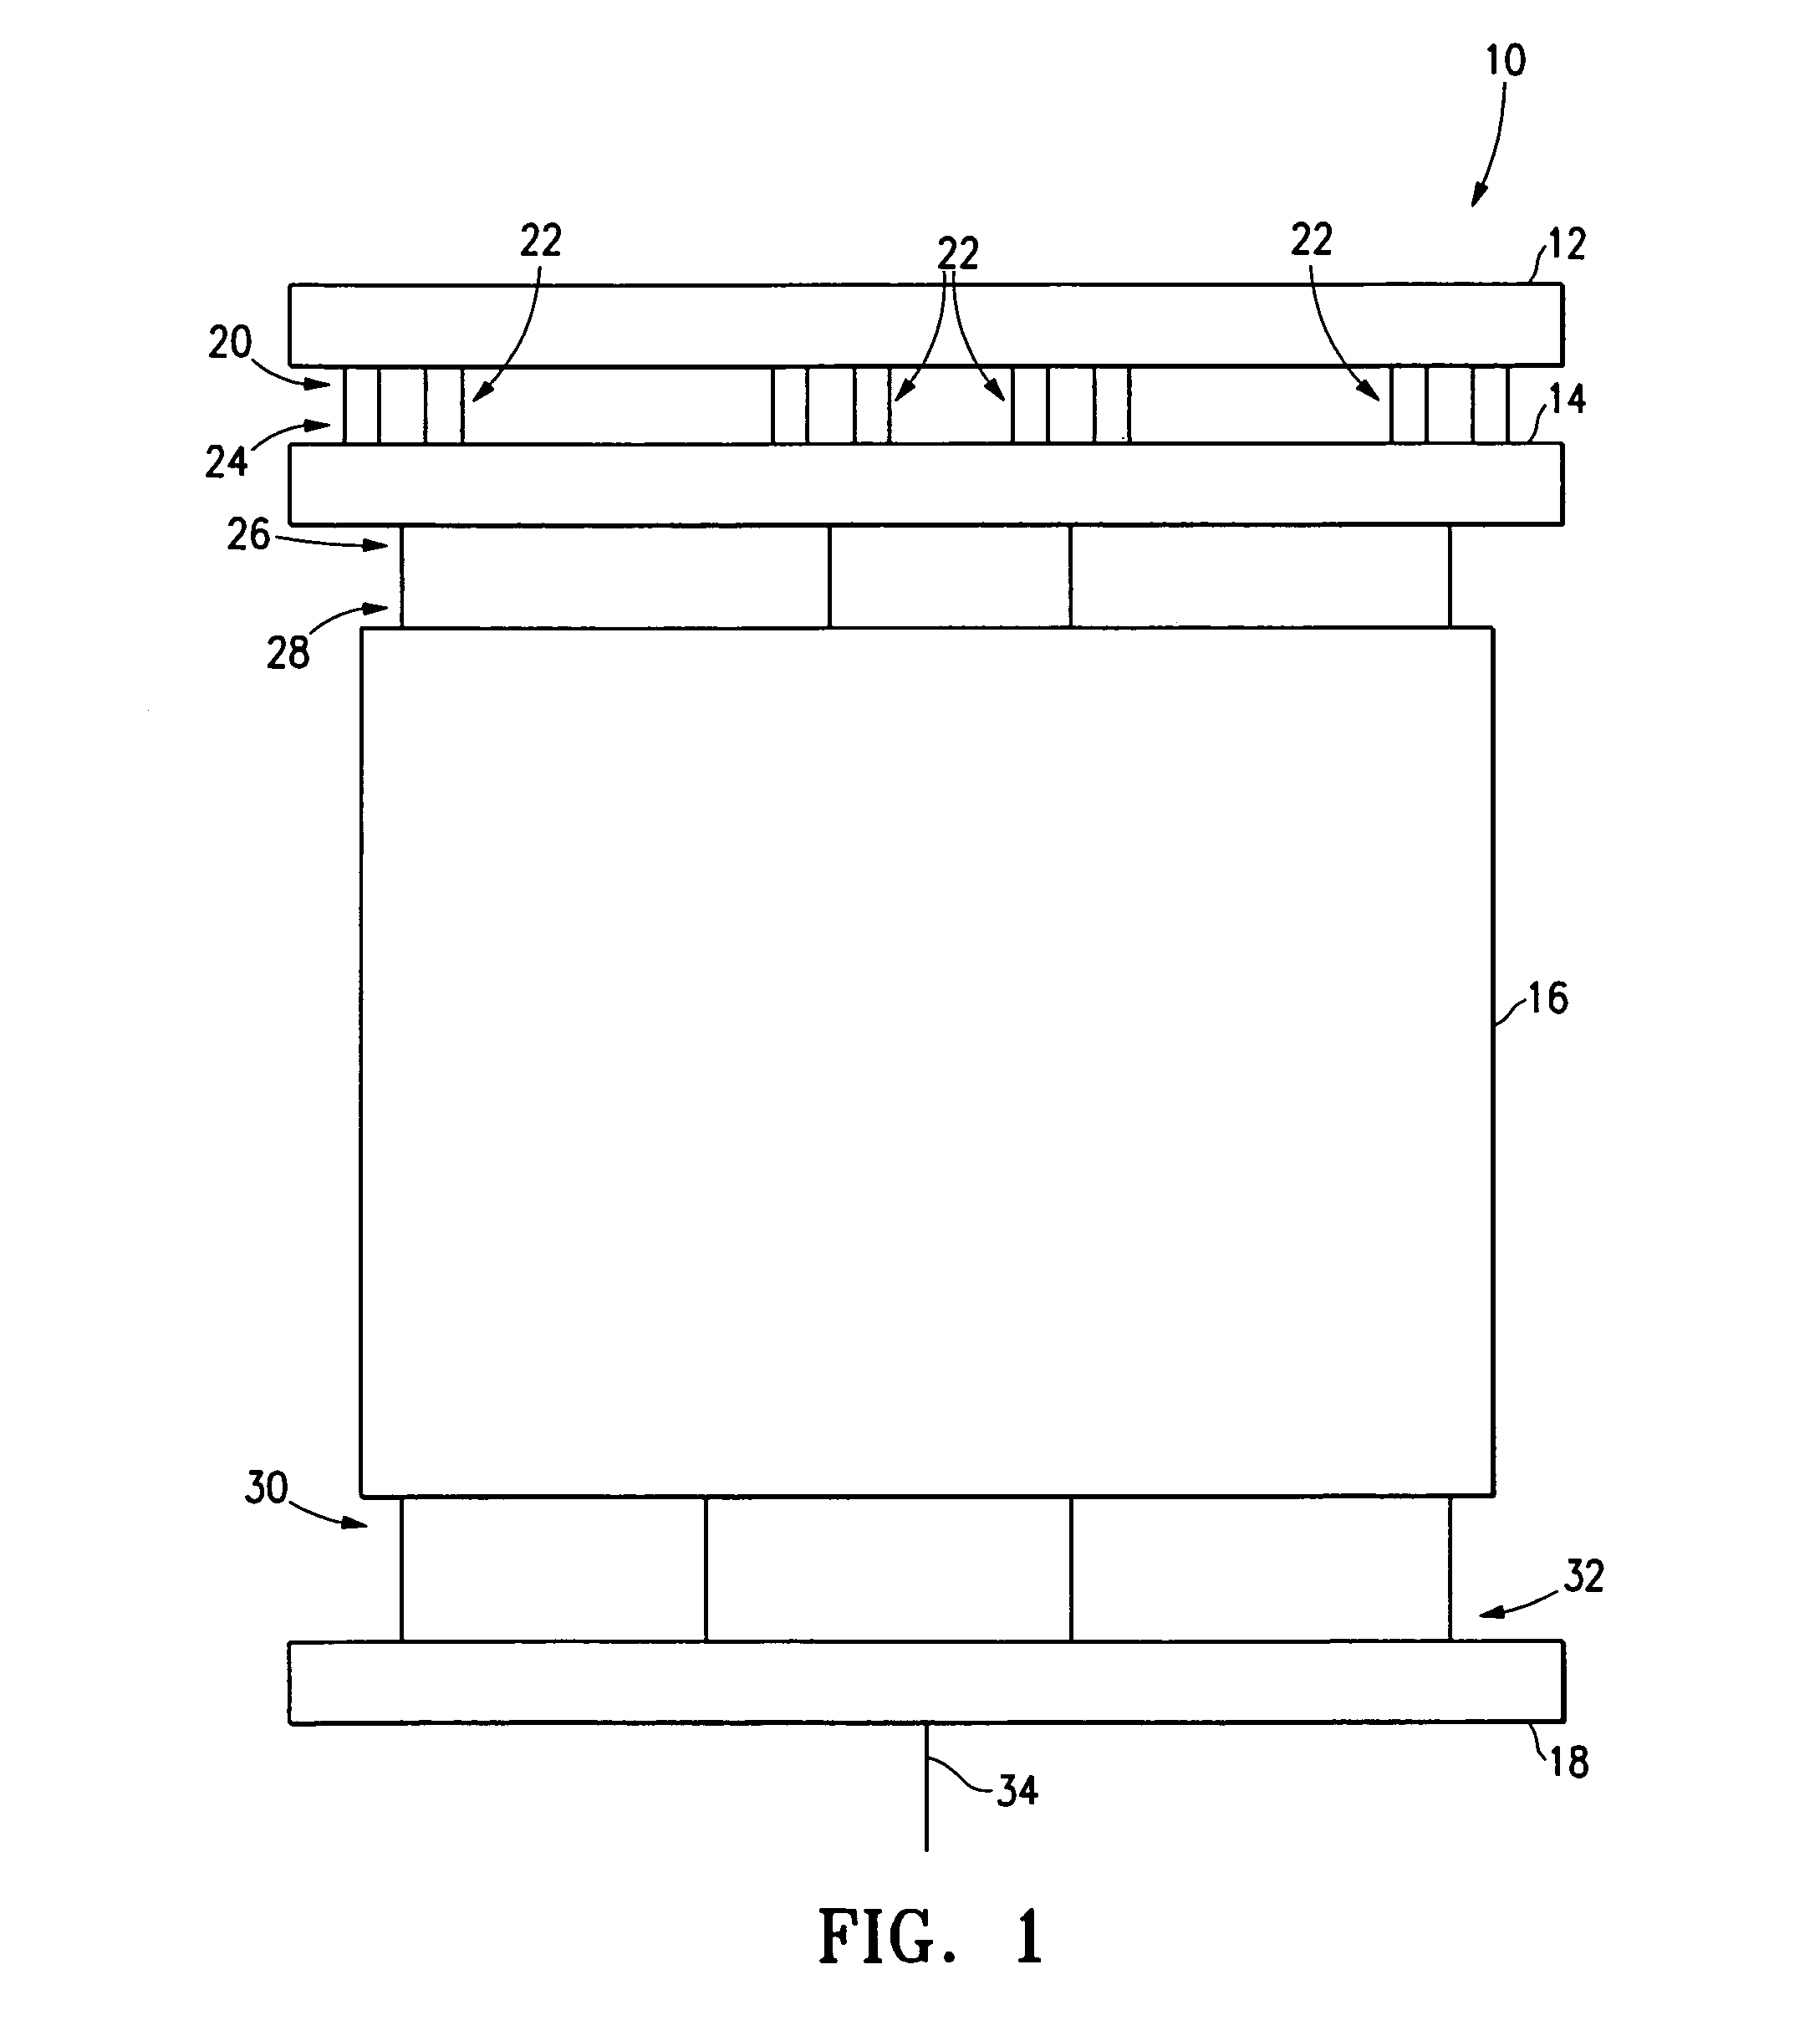 Circuit apparatus and method for testing integrated circuits using weighted pseudo-random test patterns